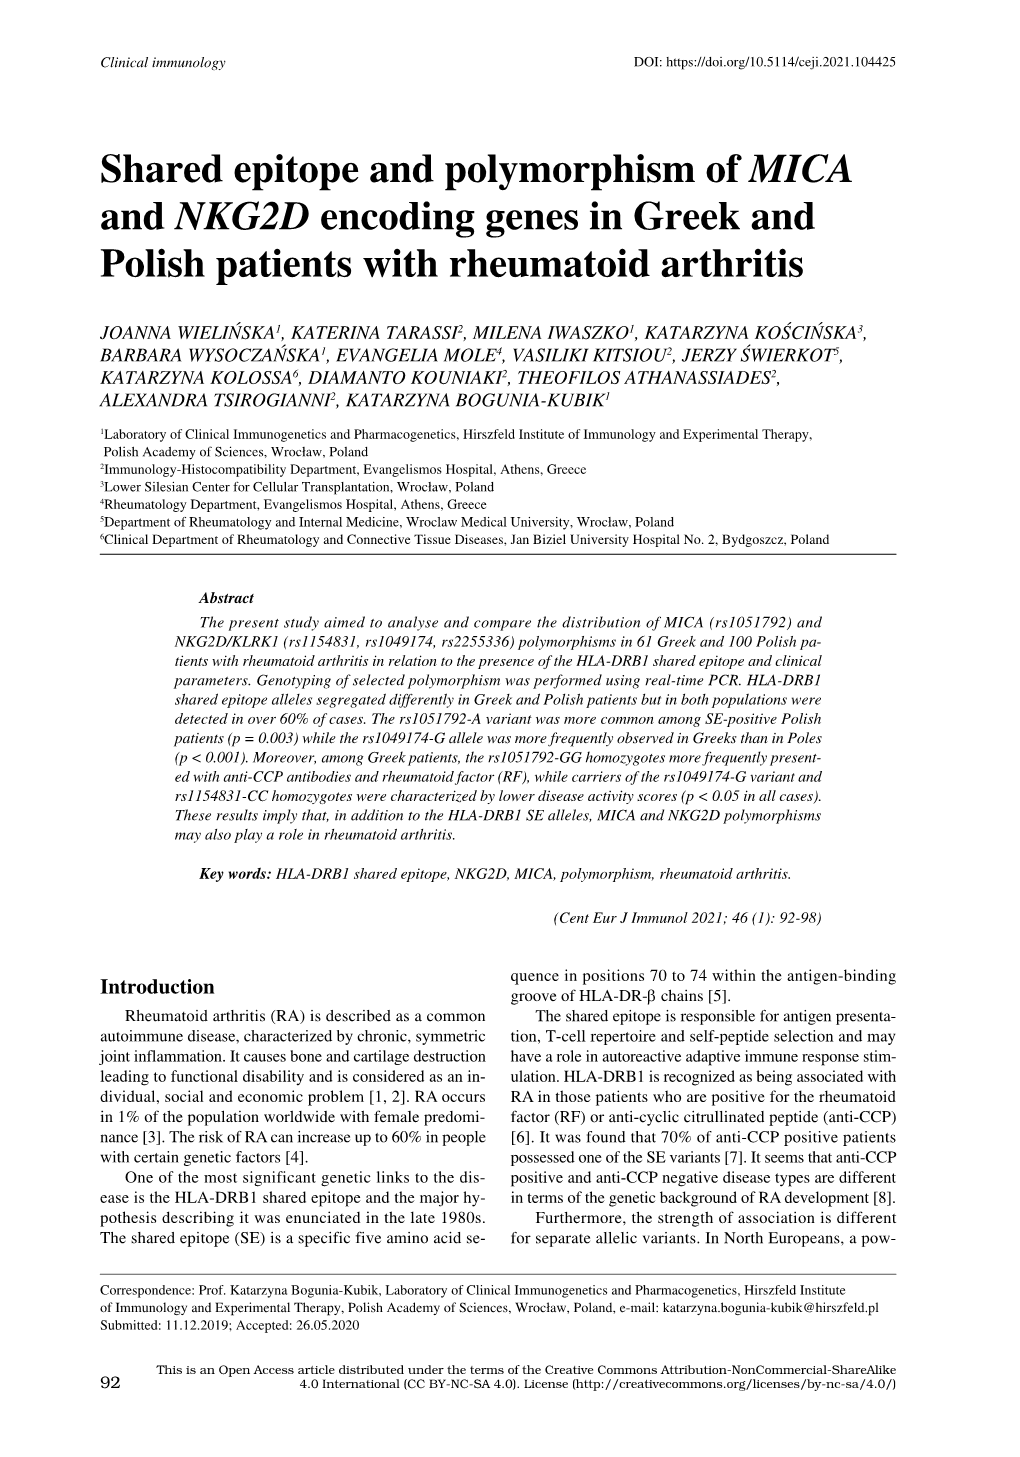 Shared Epitope and Polymorphism of MICA and NKG2D Encoding Genes in Greek and Polish Patients with Rheumatoid Arthritis